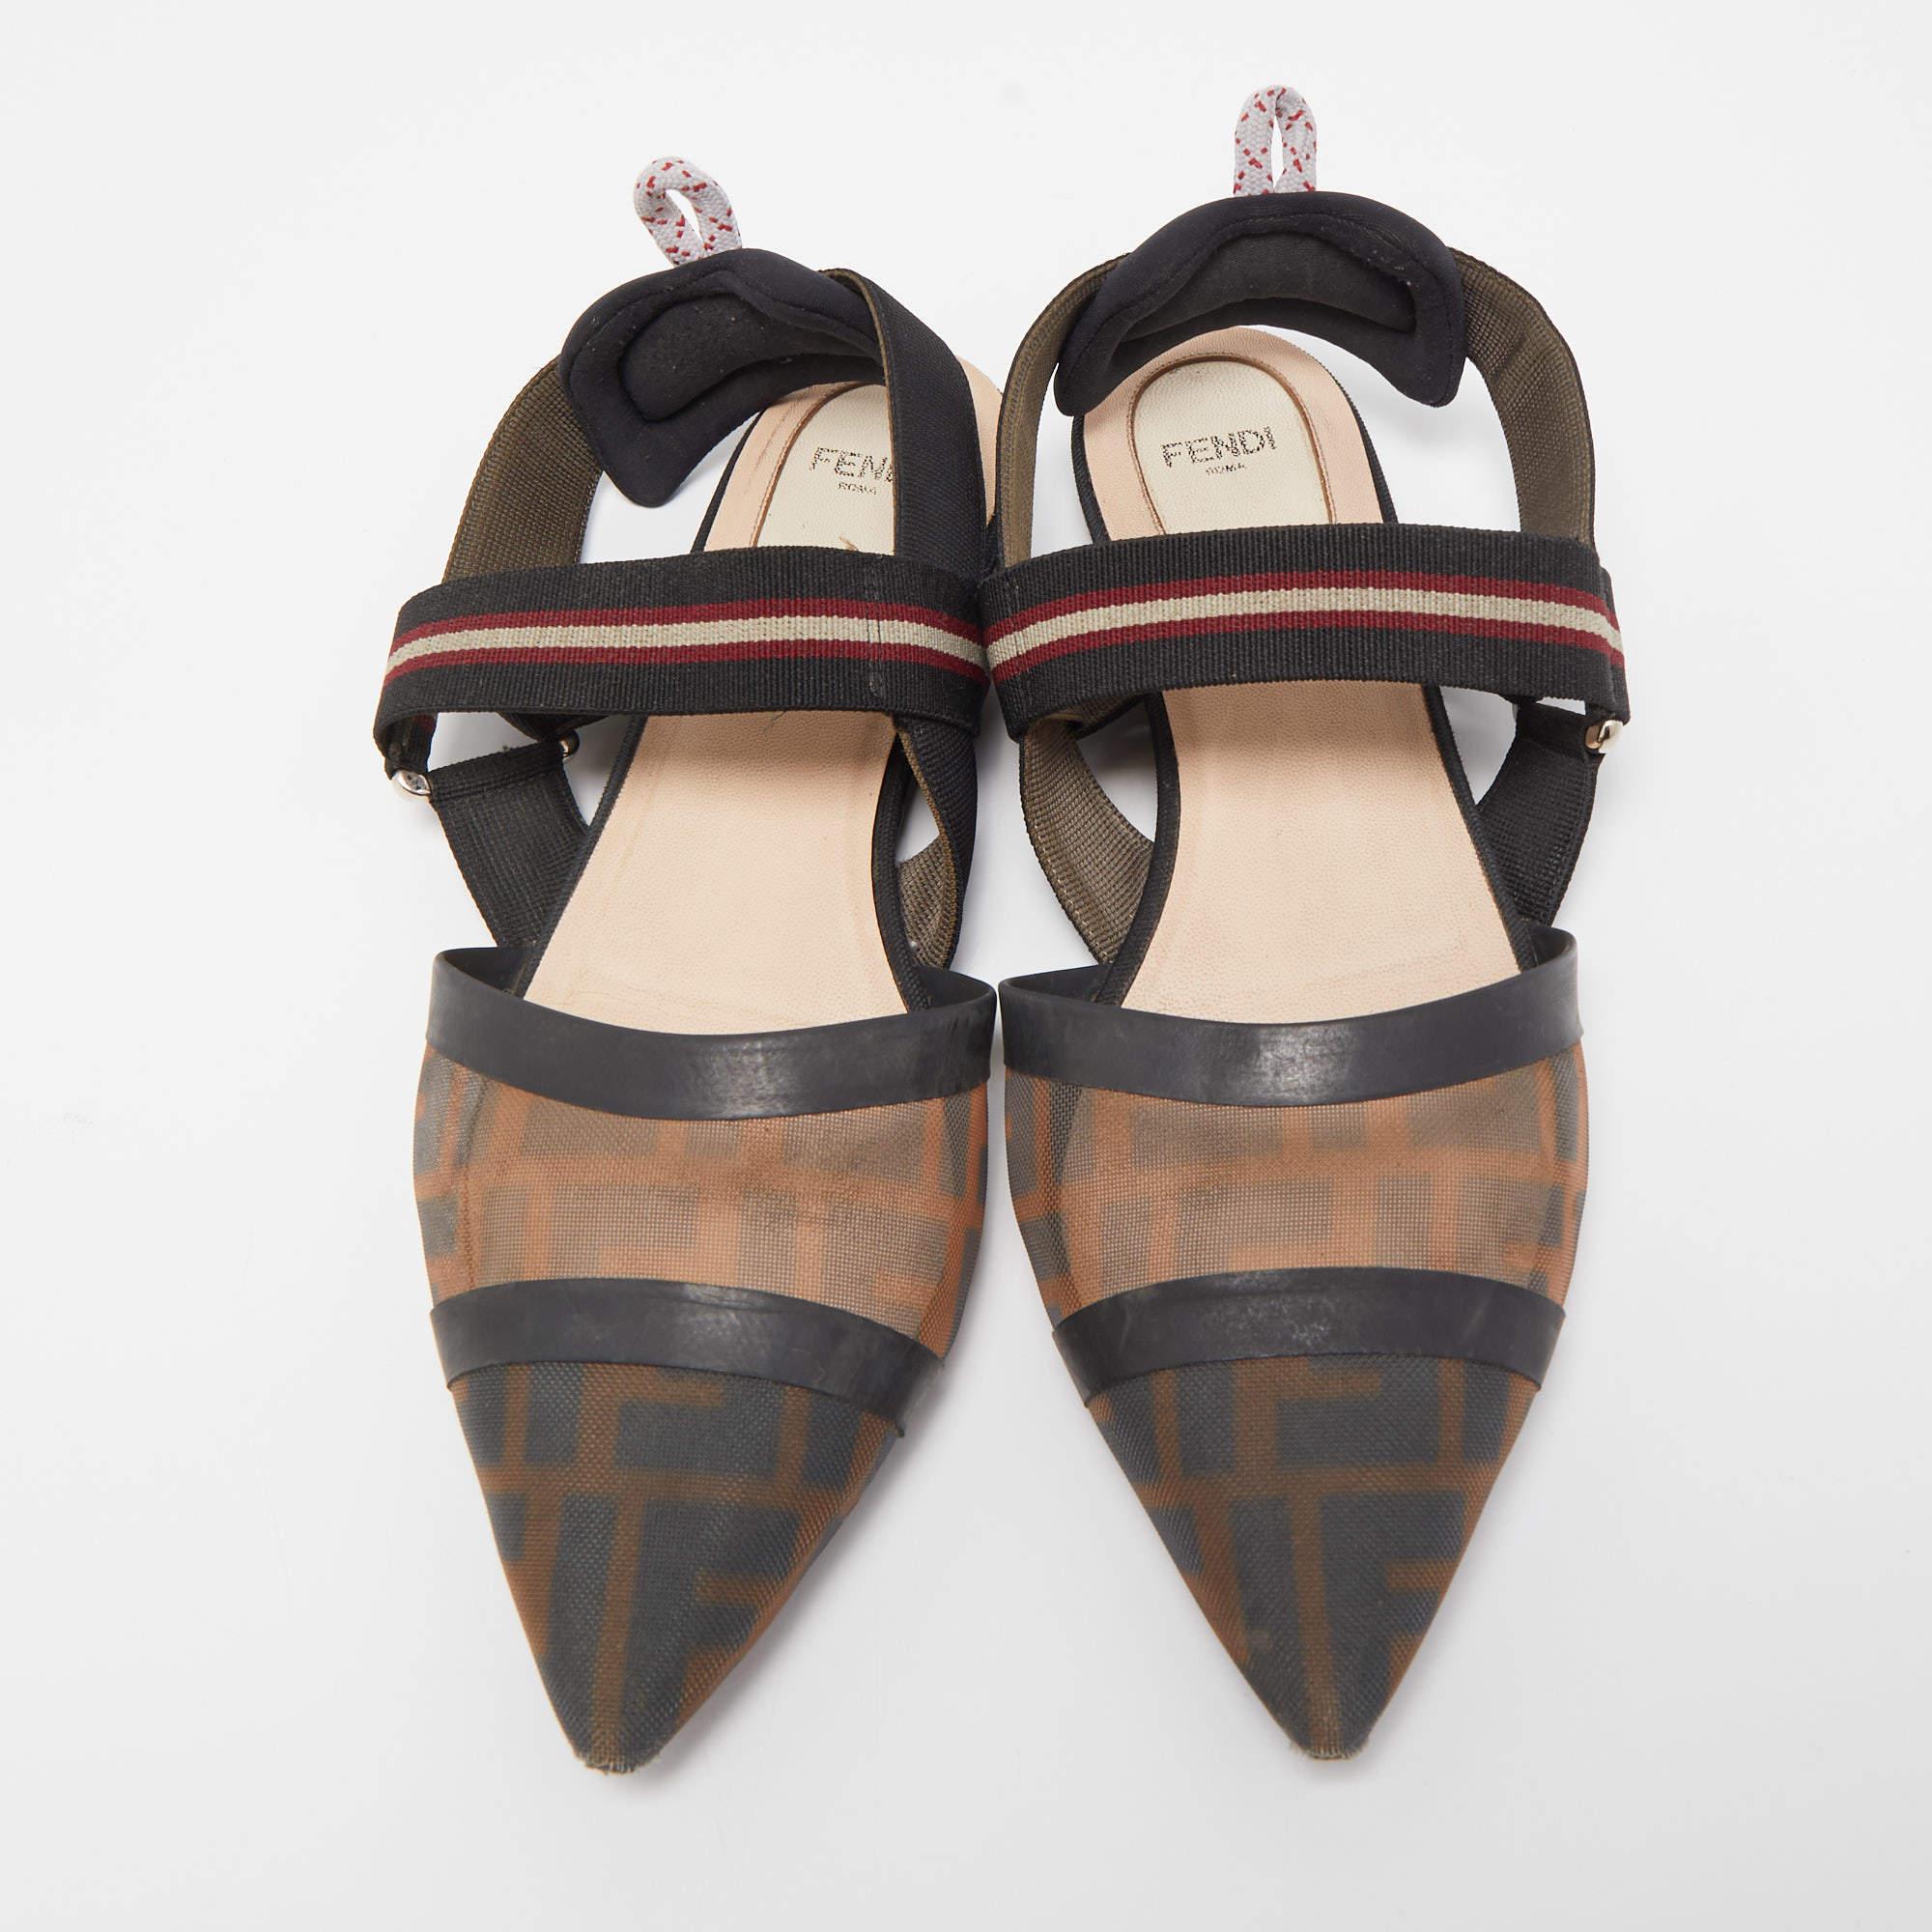 These well-crafted Fendi flats have got you covered for all-day plans. They come in a versatile design, and they look great on the feet.

Includes: Original Box, Info Booklet
